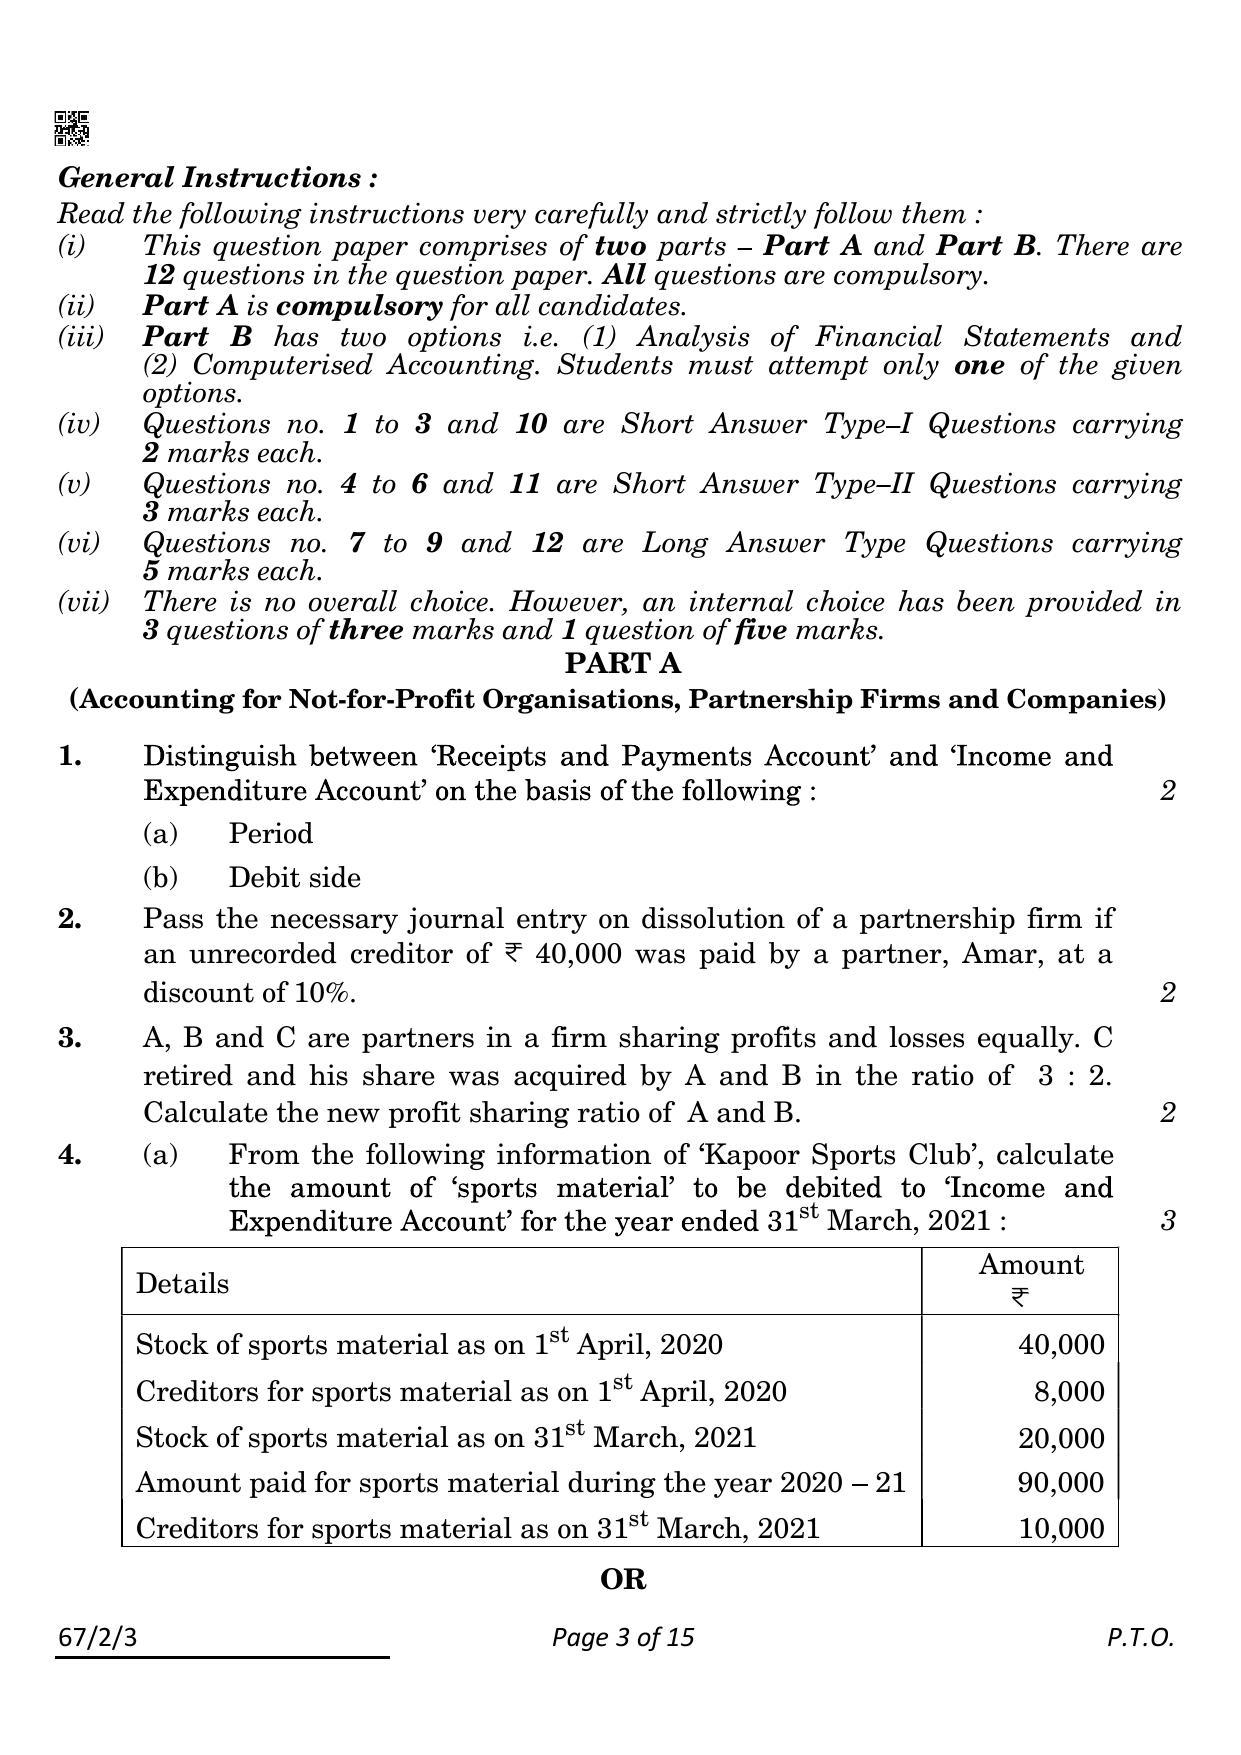 CBSE Class 12 67-2-3 Accountancy 2022 Question Paper - Page 3